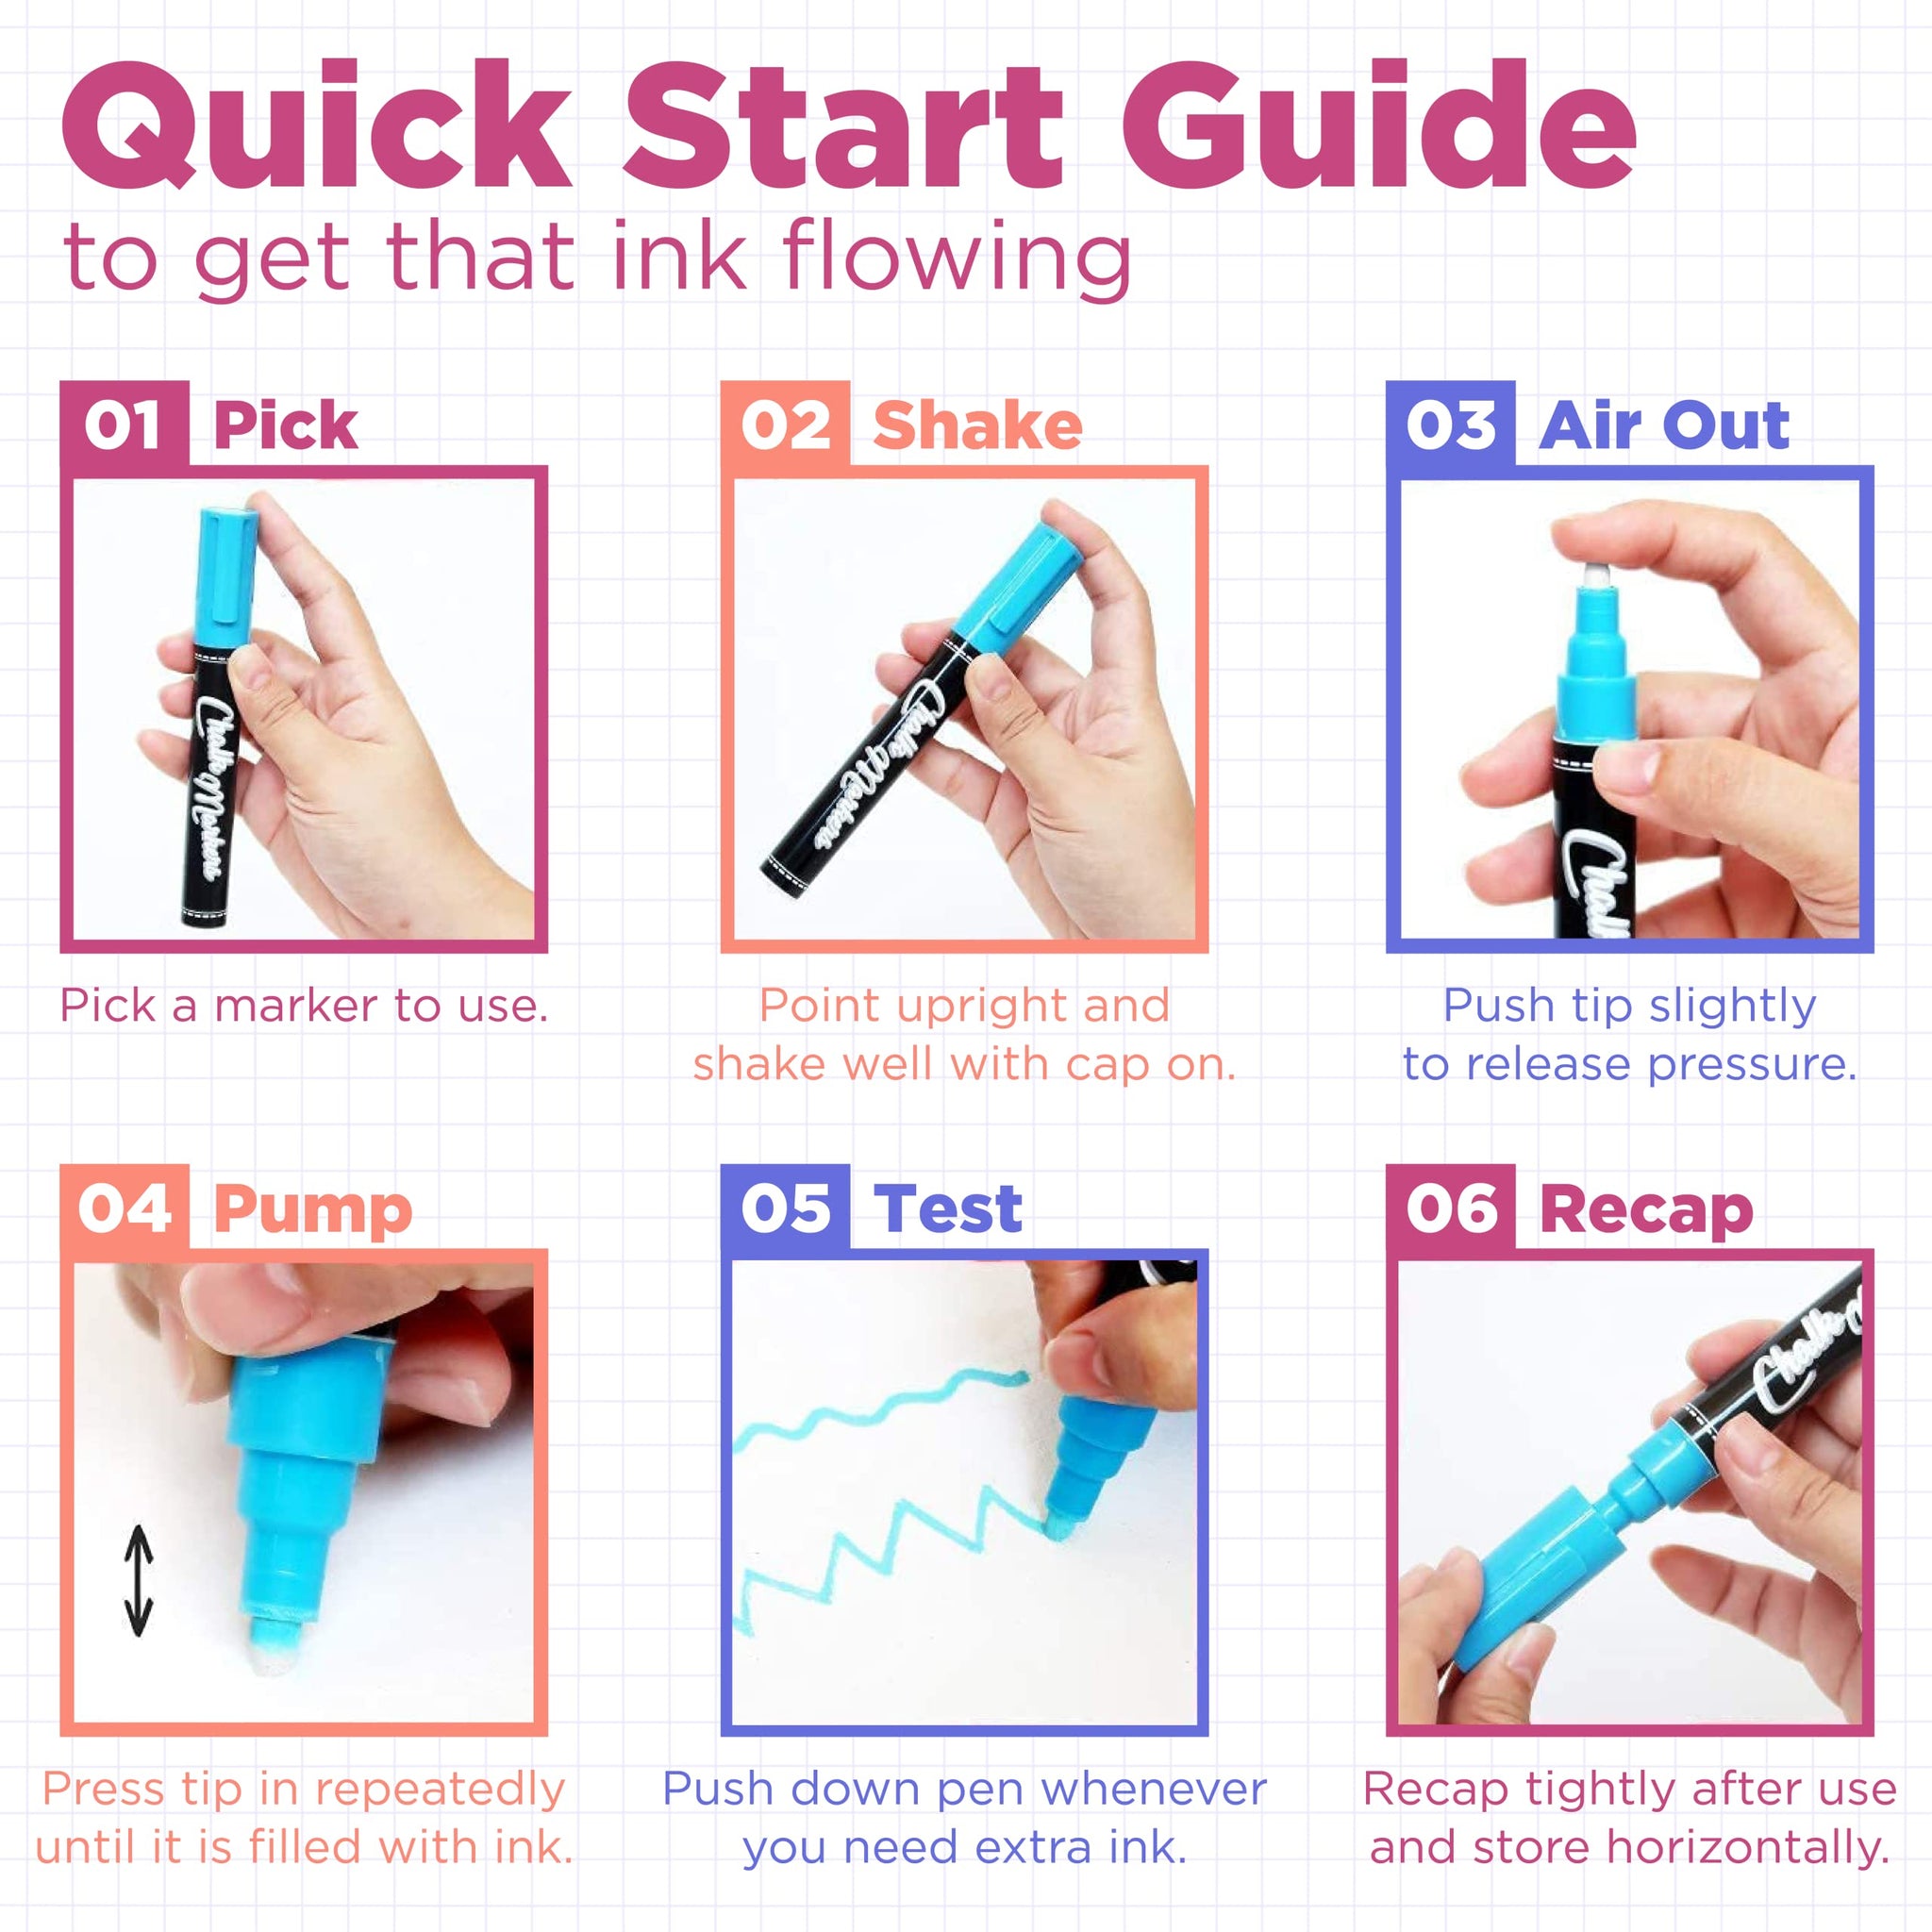 How To Reverse Chalk Marker Tips  Tips And Tricks For Beginners 